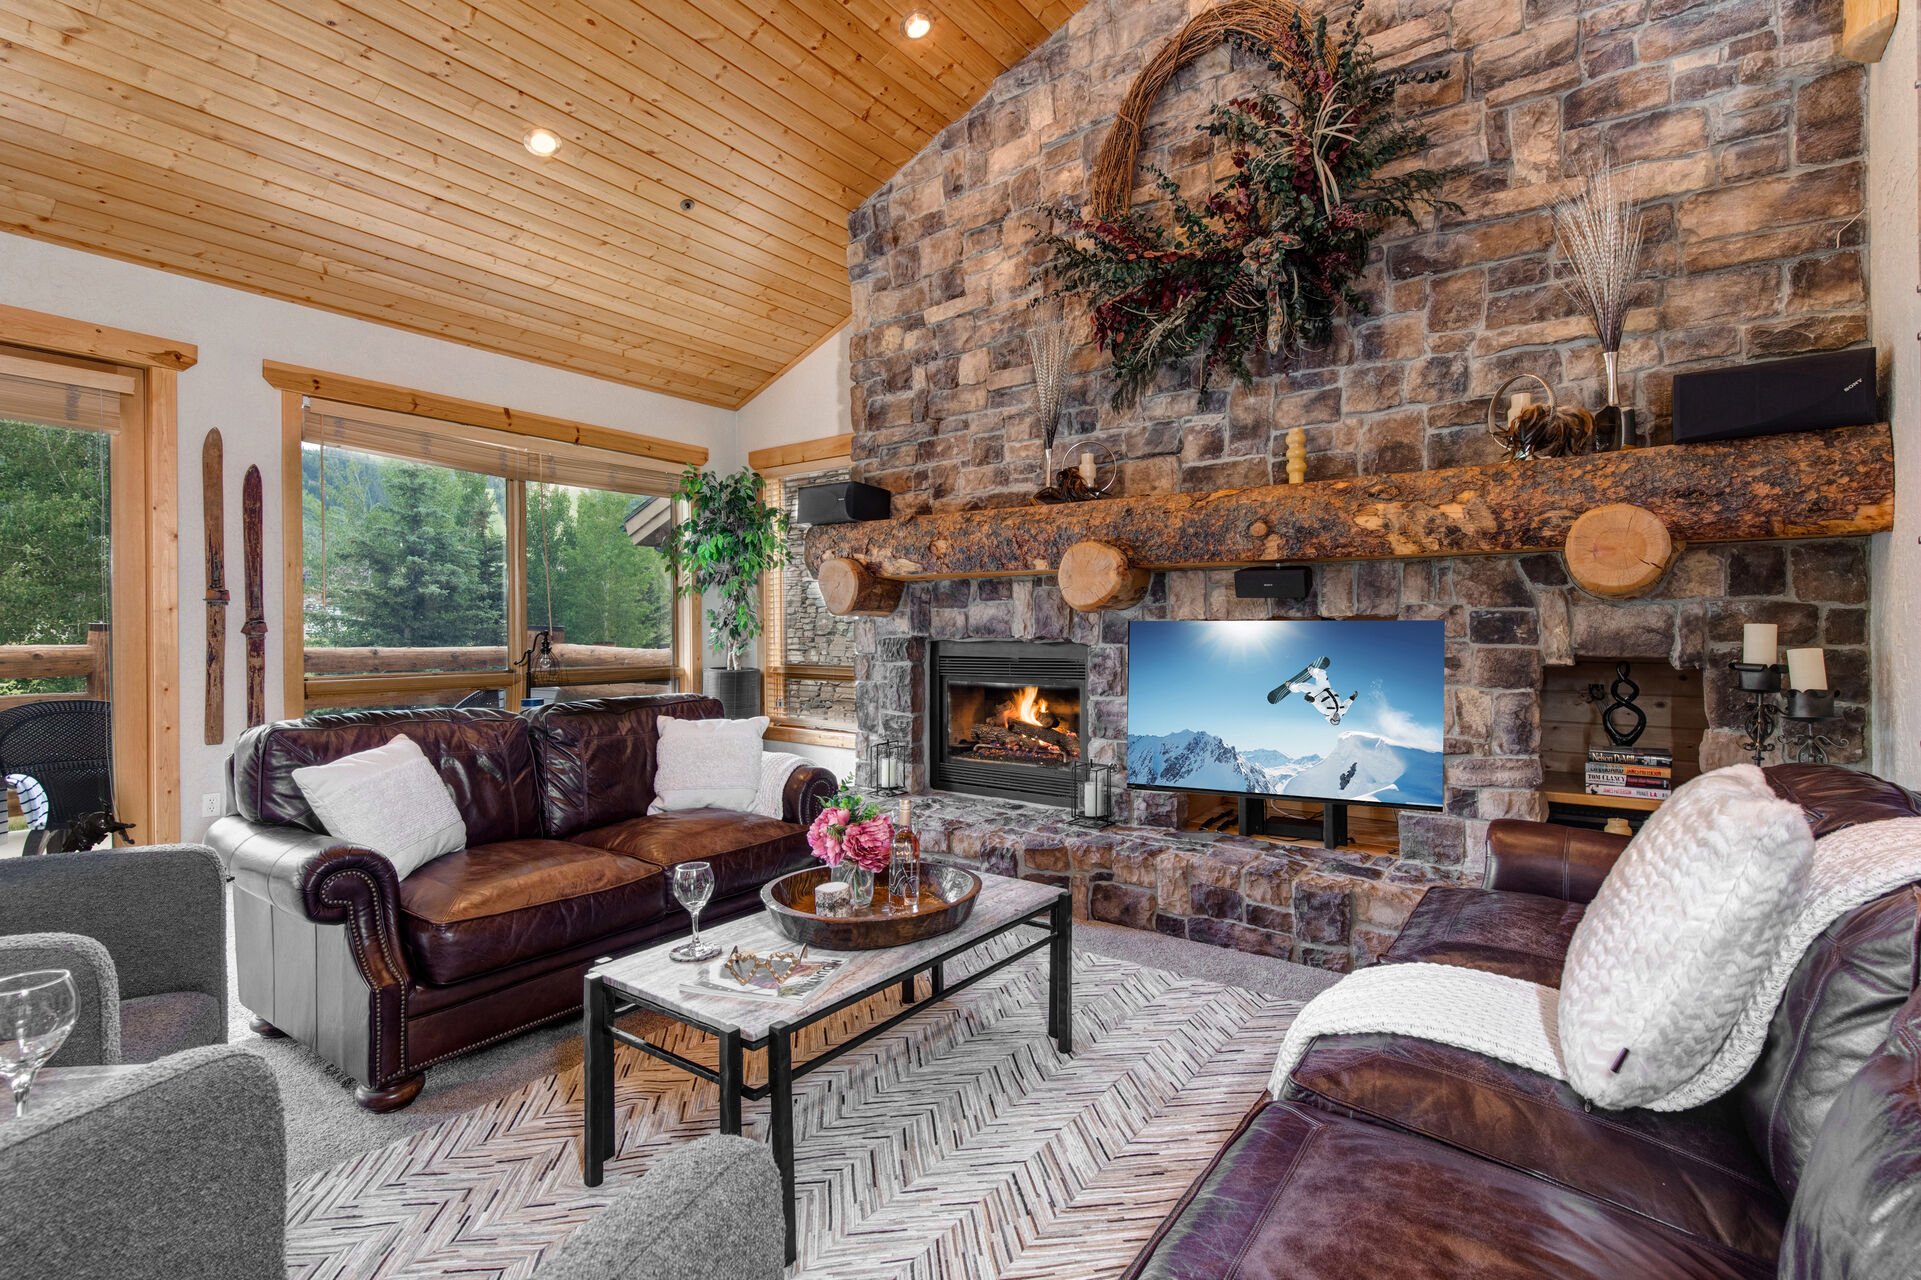 Main Level Living Room with plush leather sofas, contemporary arm chairs, smart tv, gas fireplace, vaulted ceilings, and private hot tub patio access